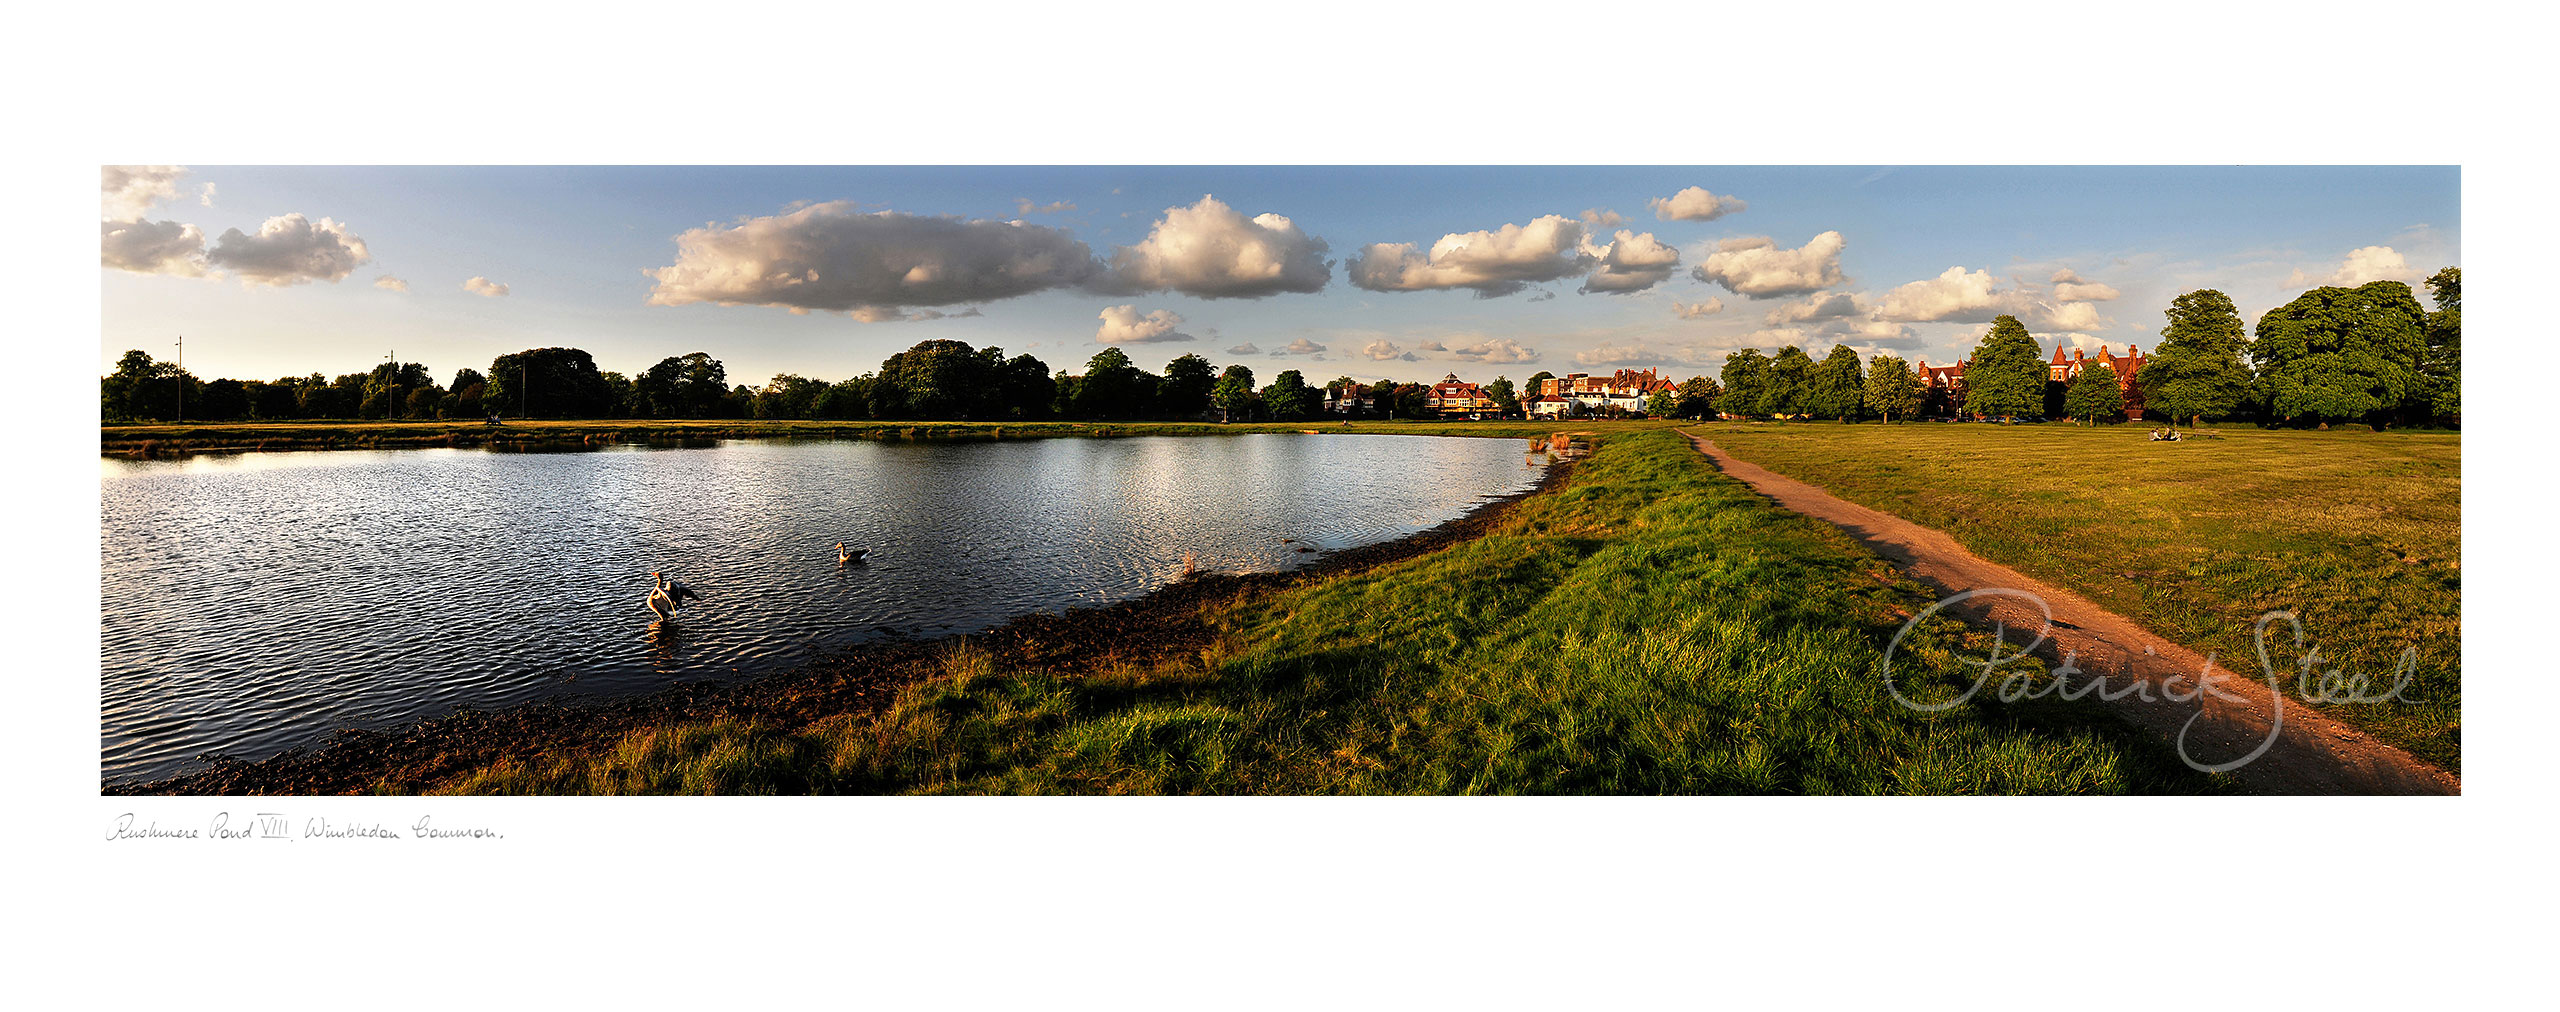 photograph of rushmere pond by landscape photographer patrick steel